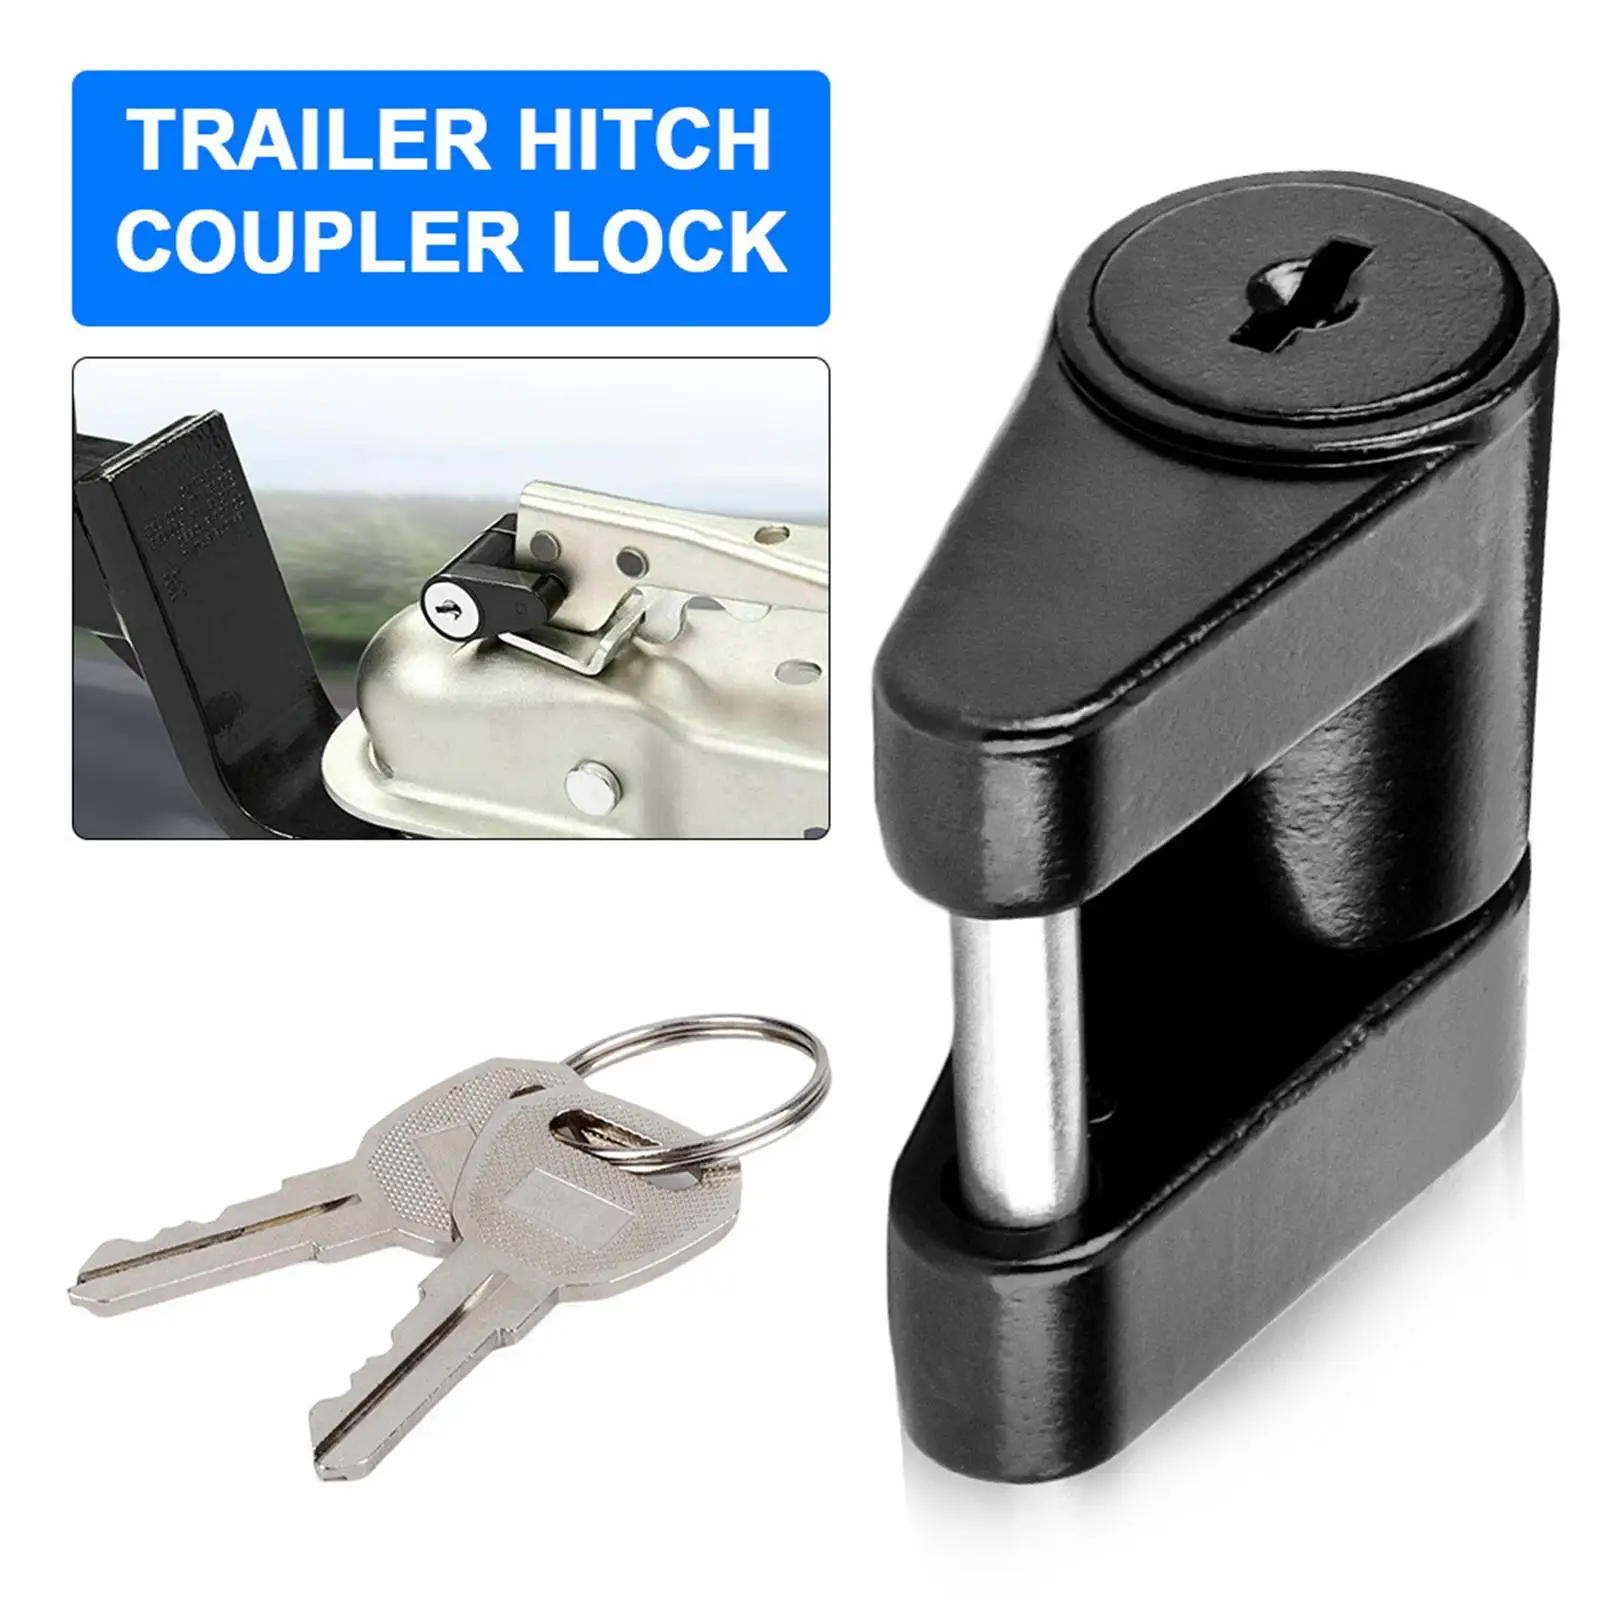 Trailer Hitch Coupler Lock with 2 Keys 3/4 inch Span 1/4 inch Pin for Car Coupling Lock Campers Construction Vehicles RV